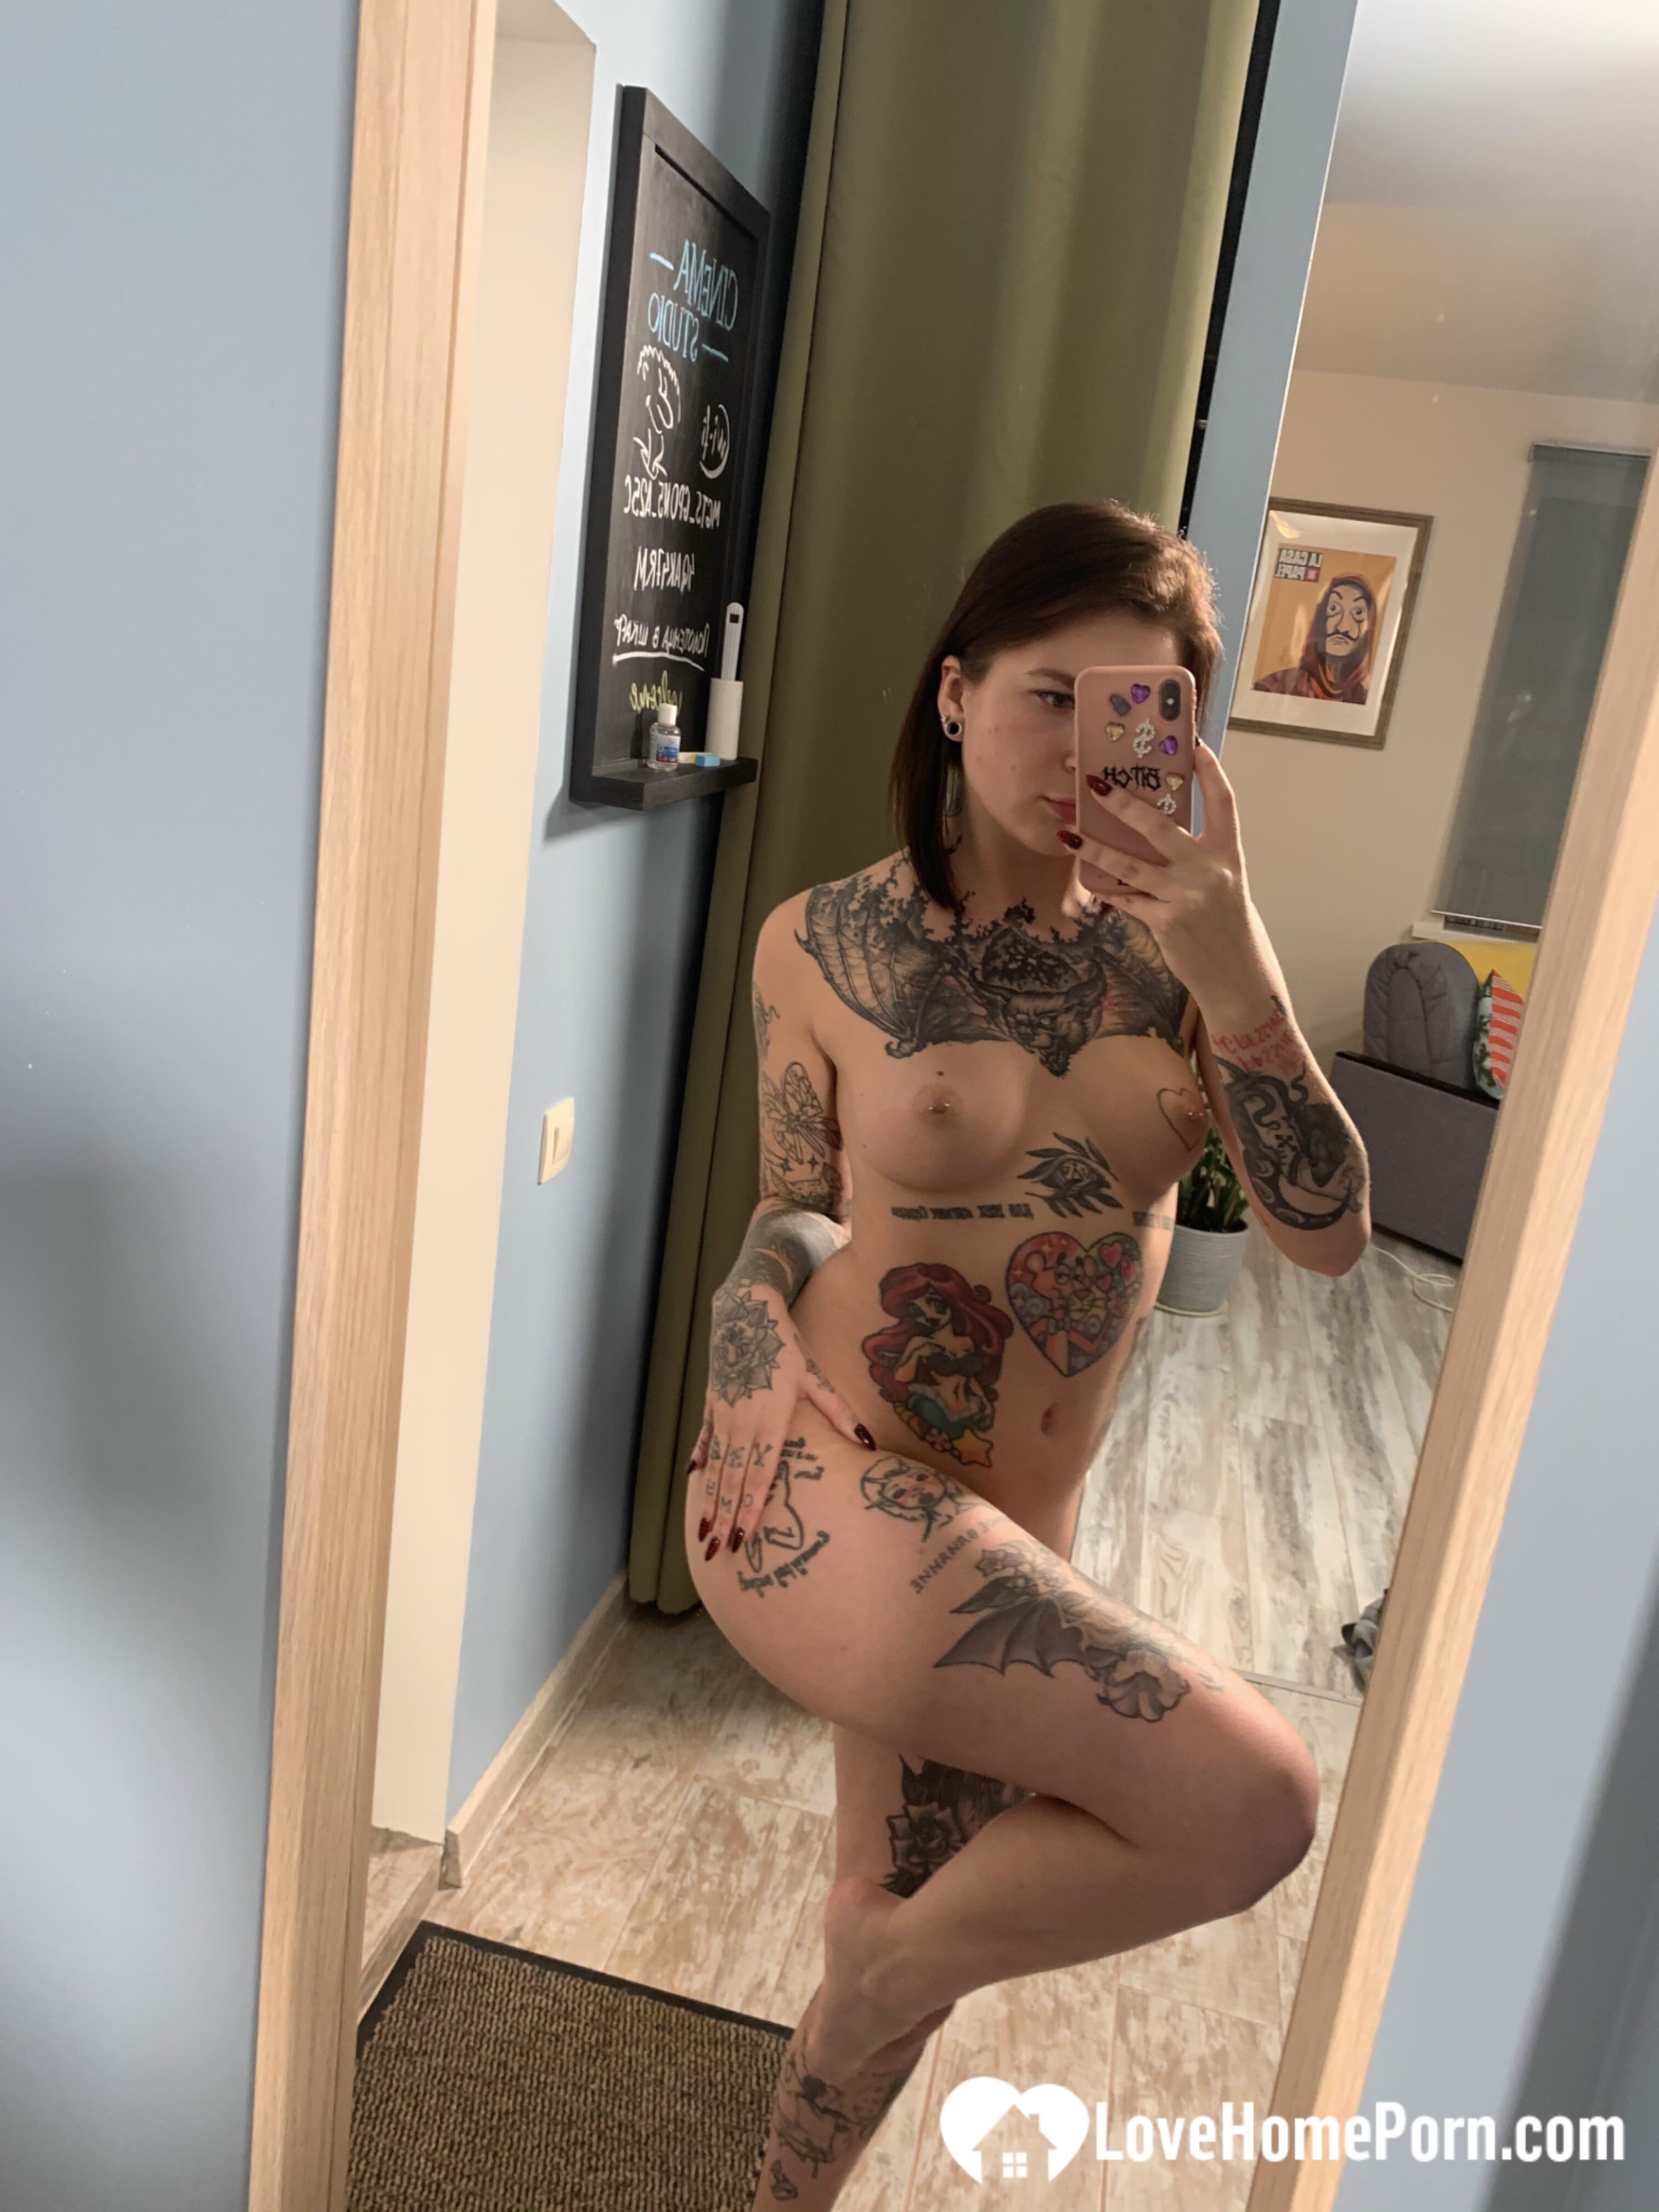 Tattooed babe taking selfies with amazing angles